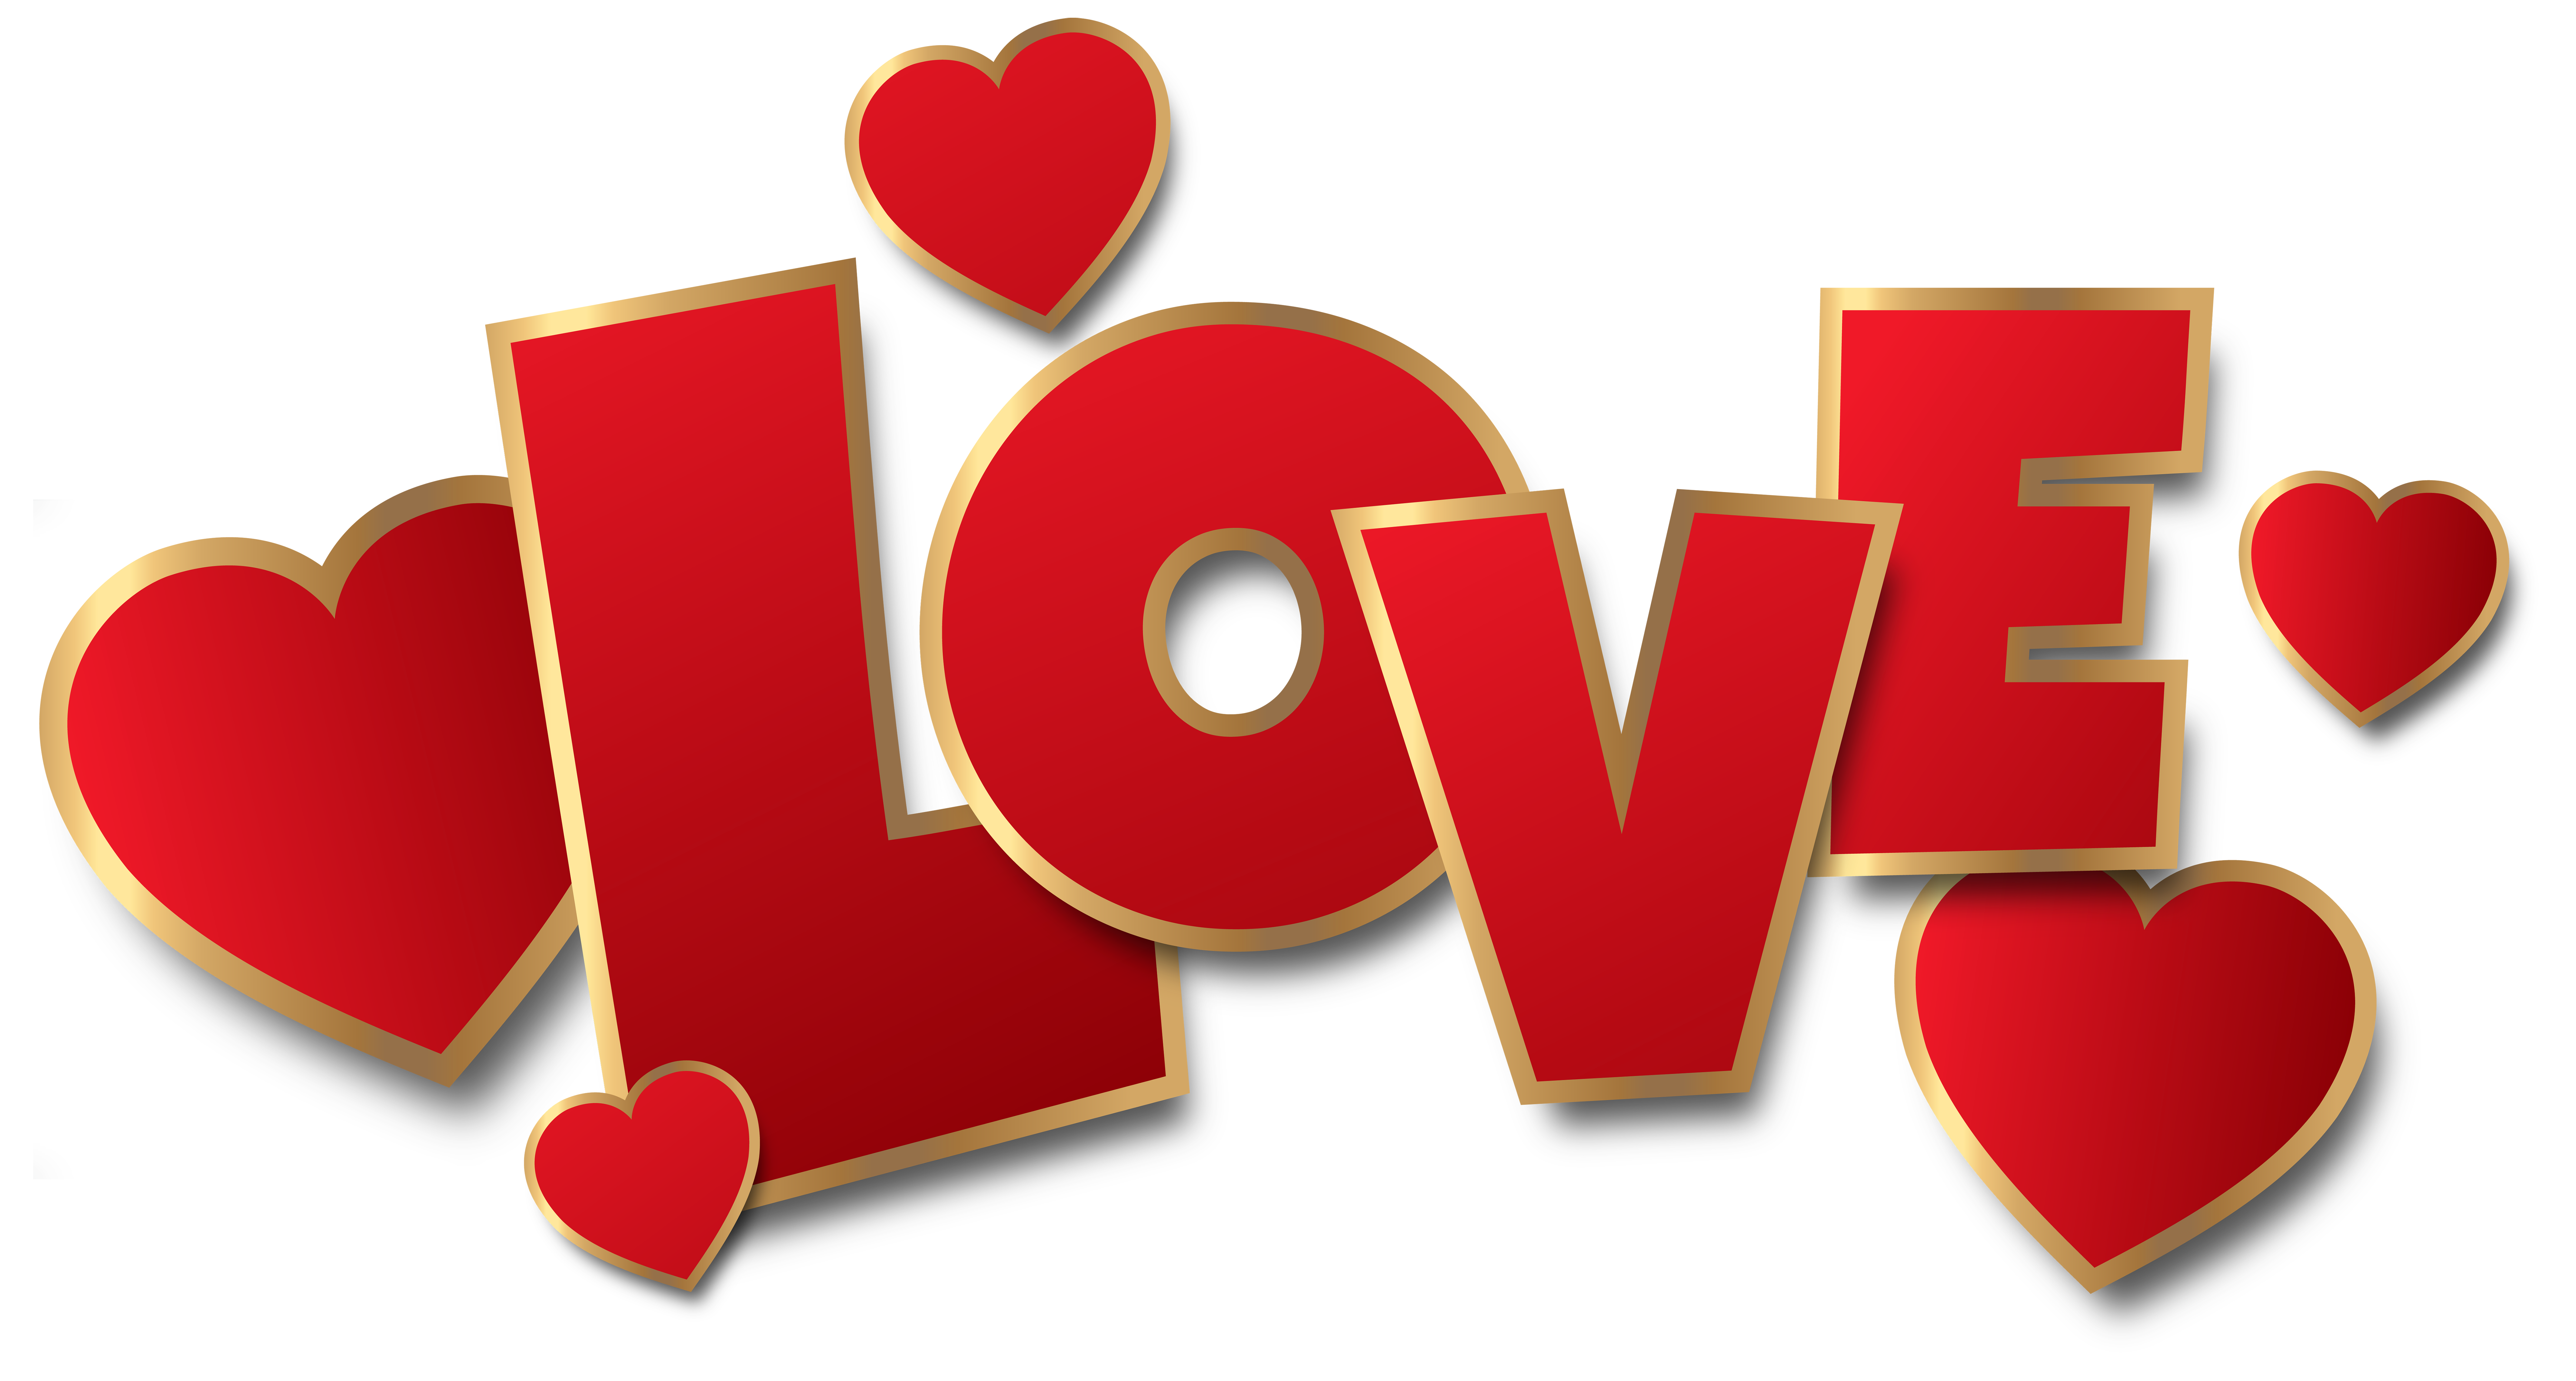 Free Love Clipart Png, Download Free Clip Art, Free Clip Art.